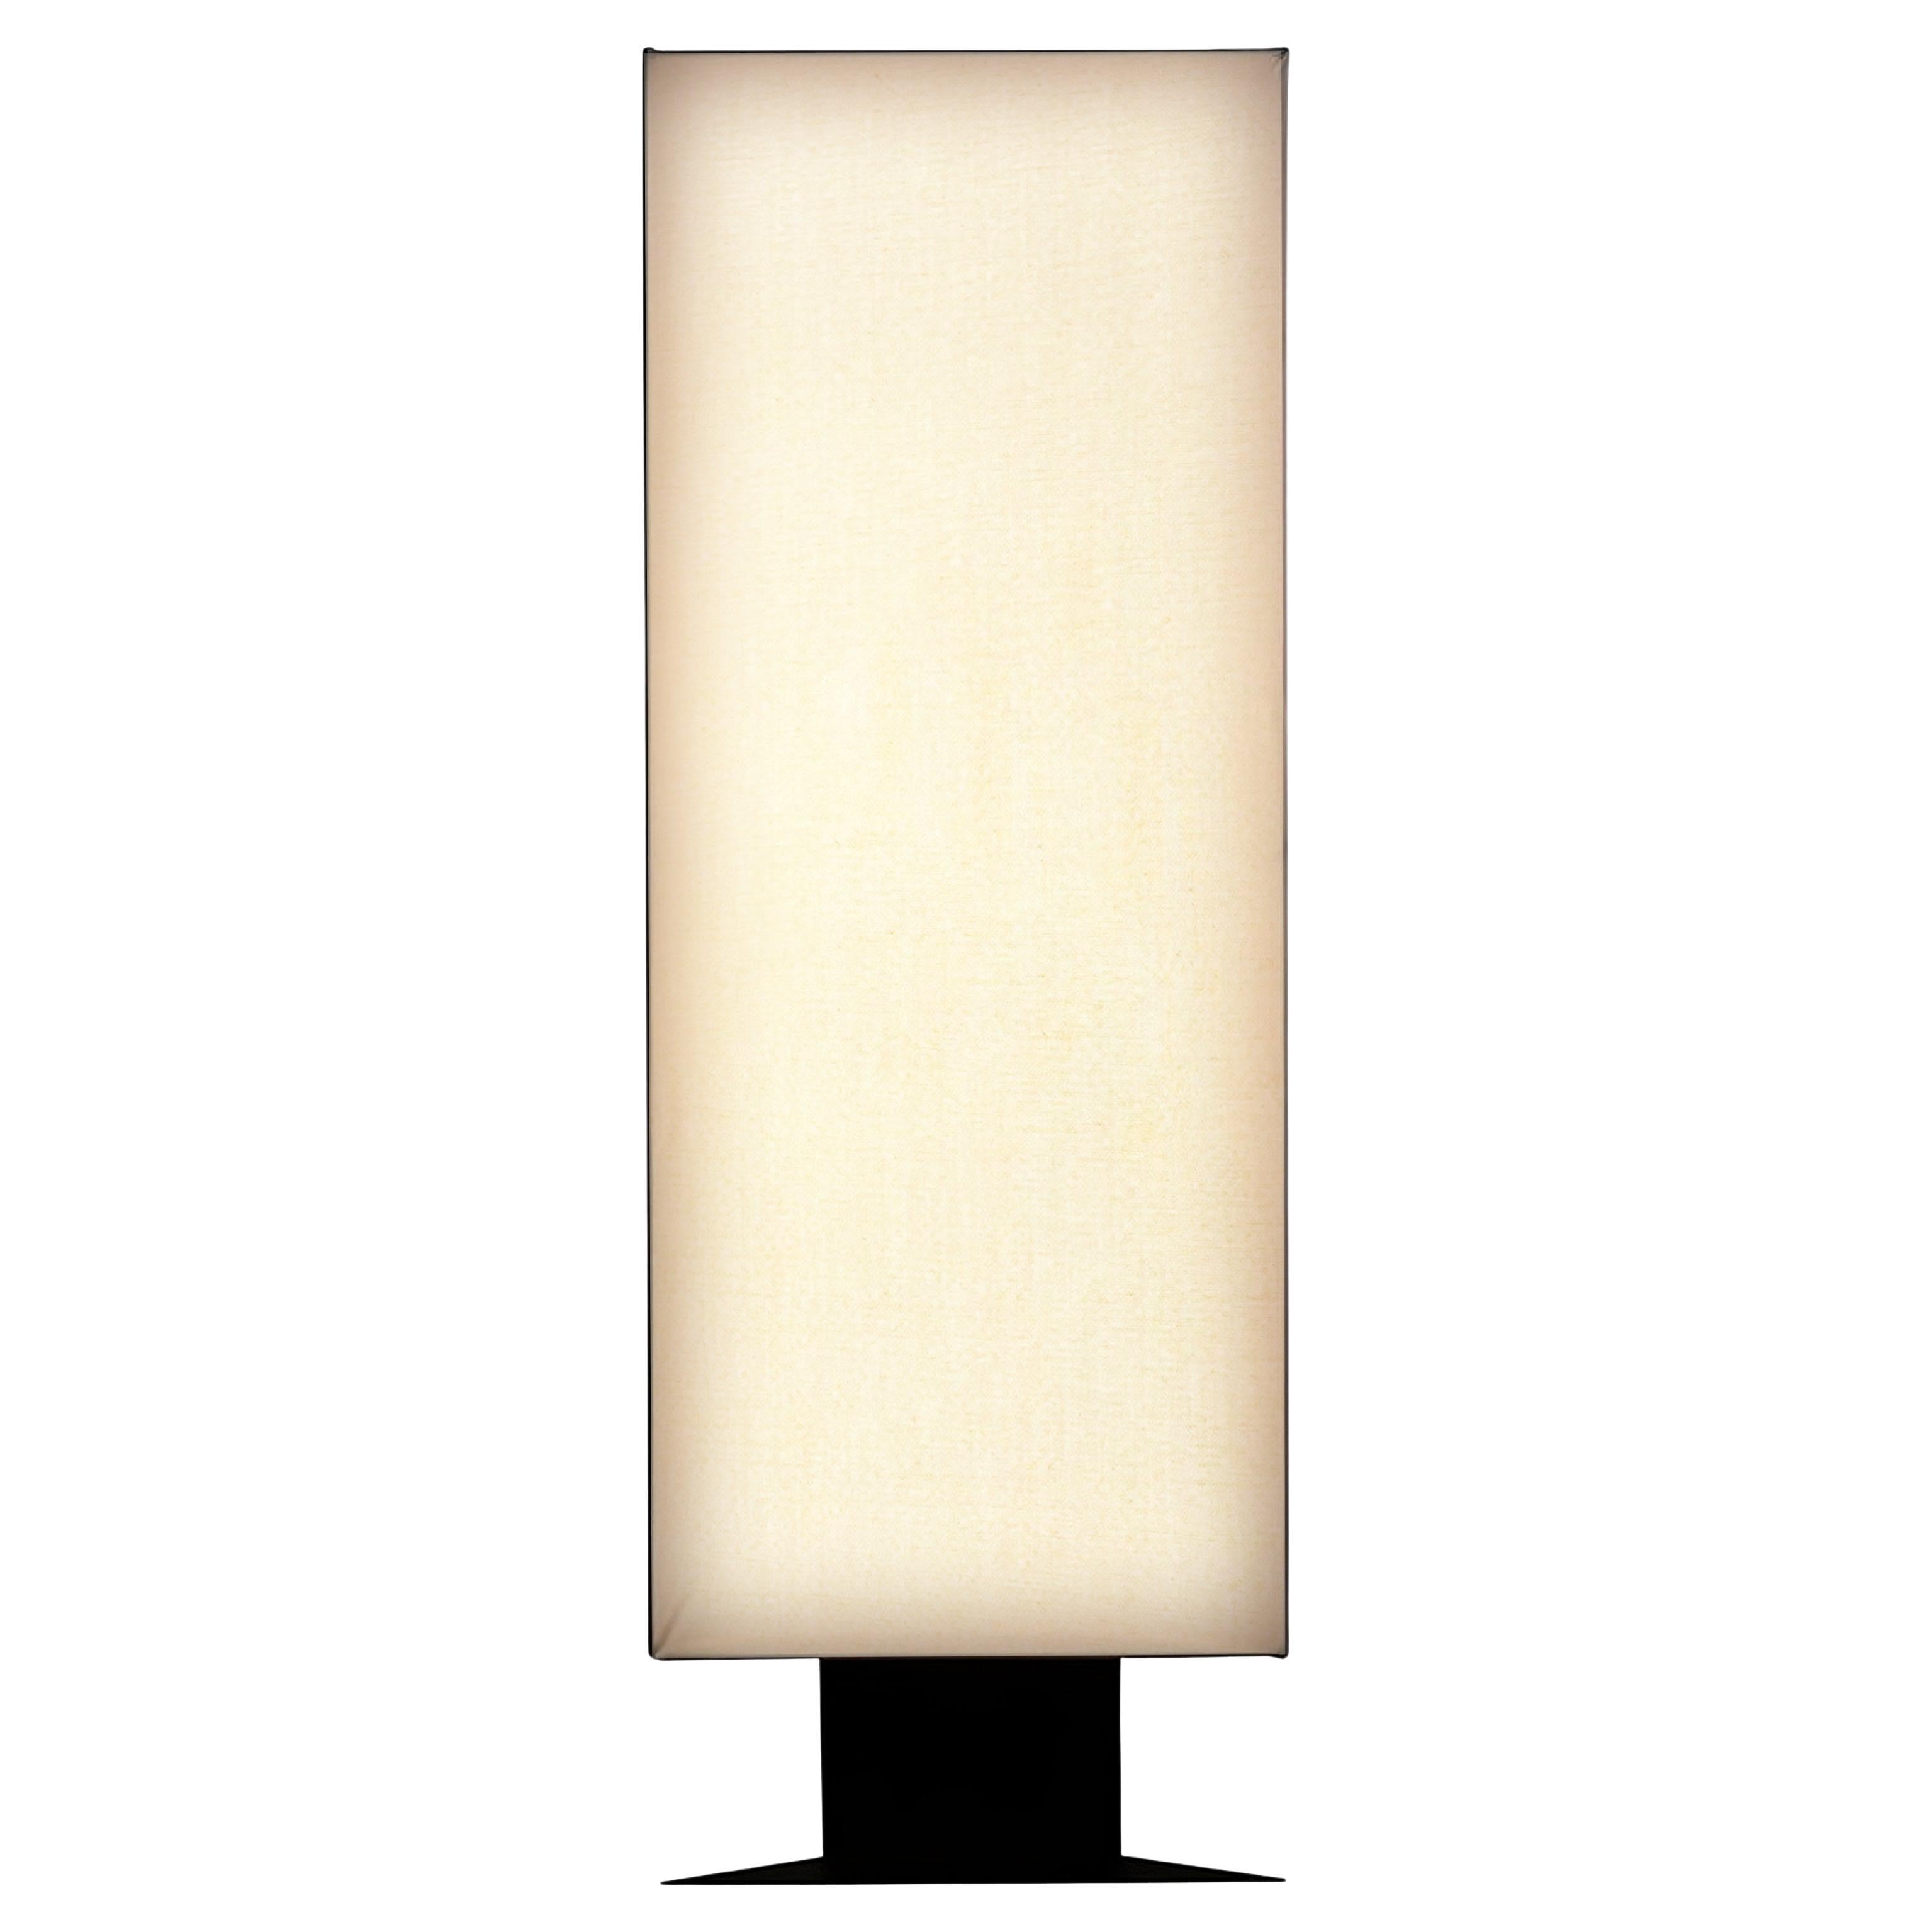 Accademia Floor Lamp by Cini Boeri for Artemide 1978 For Sale